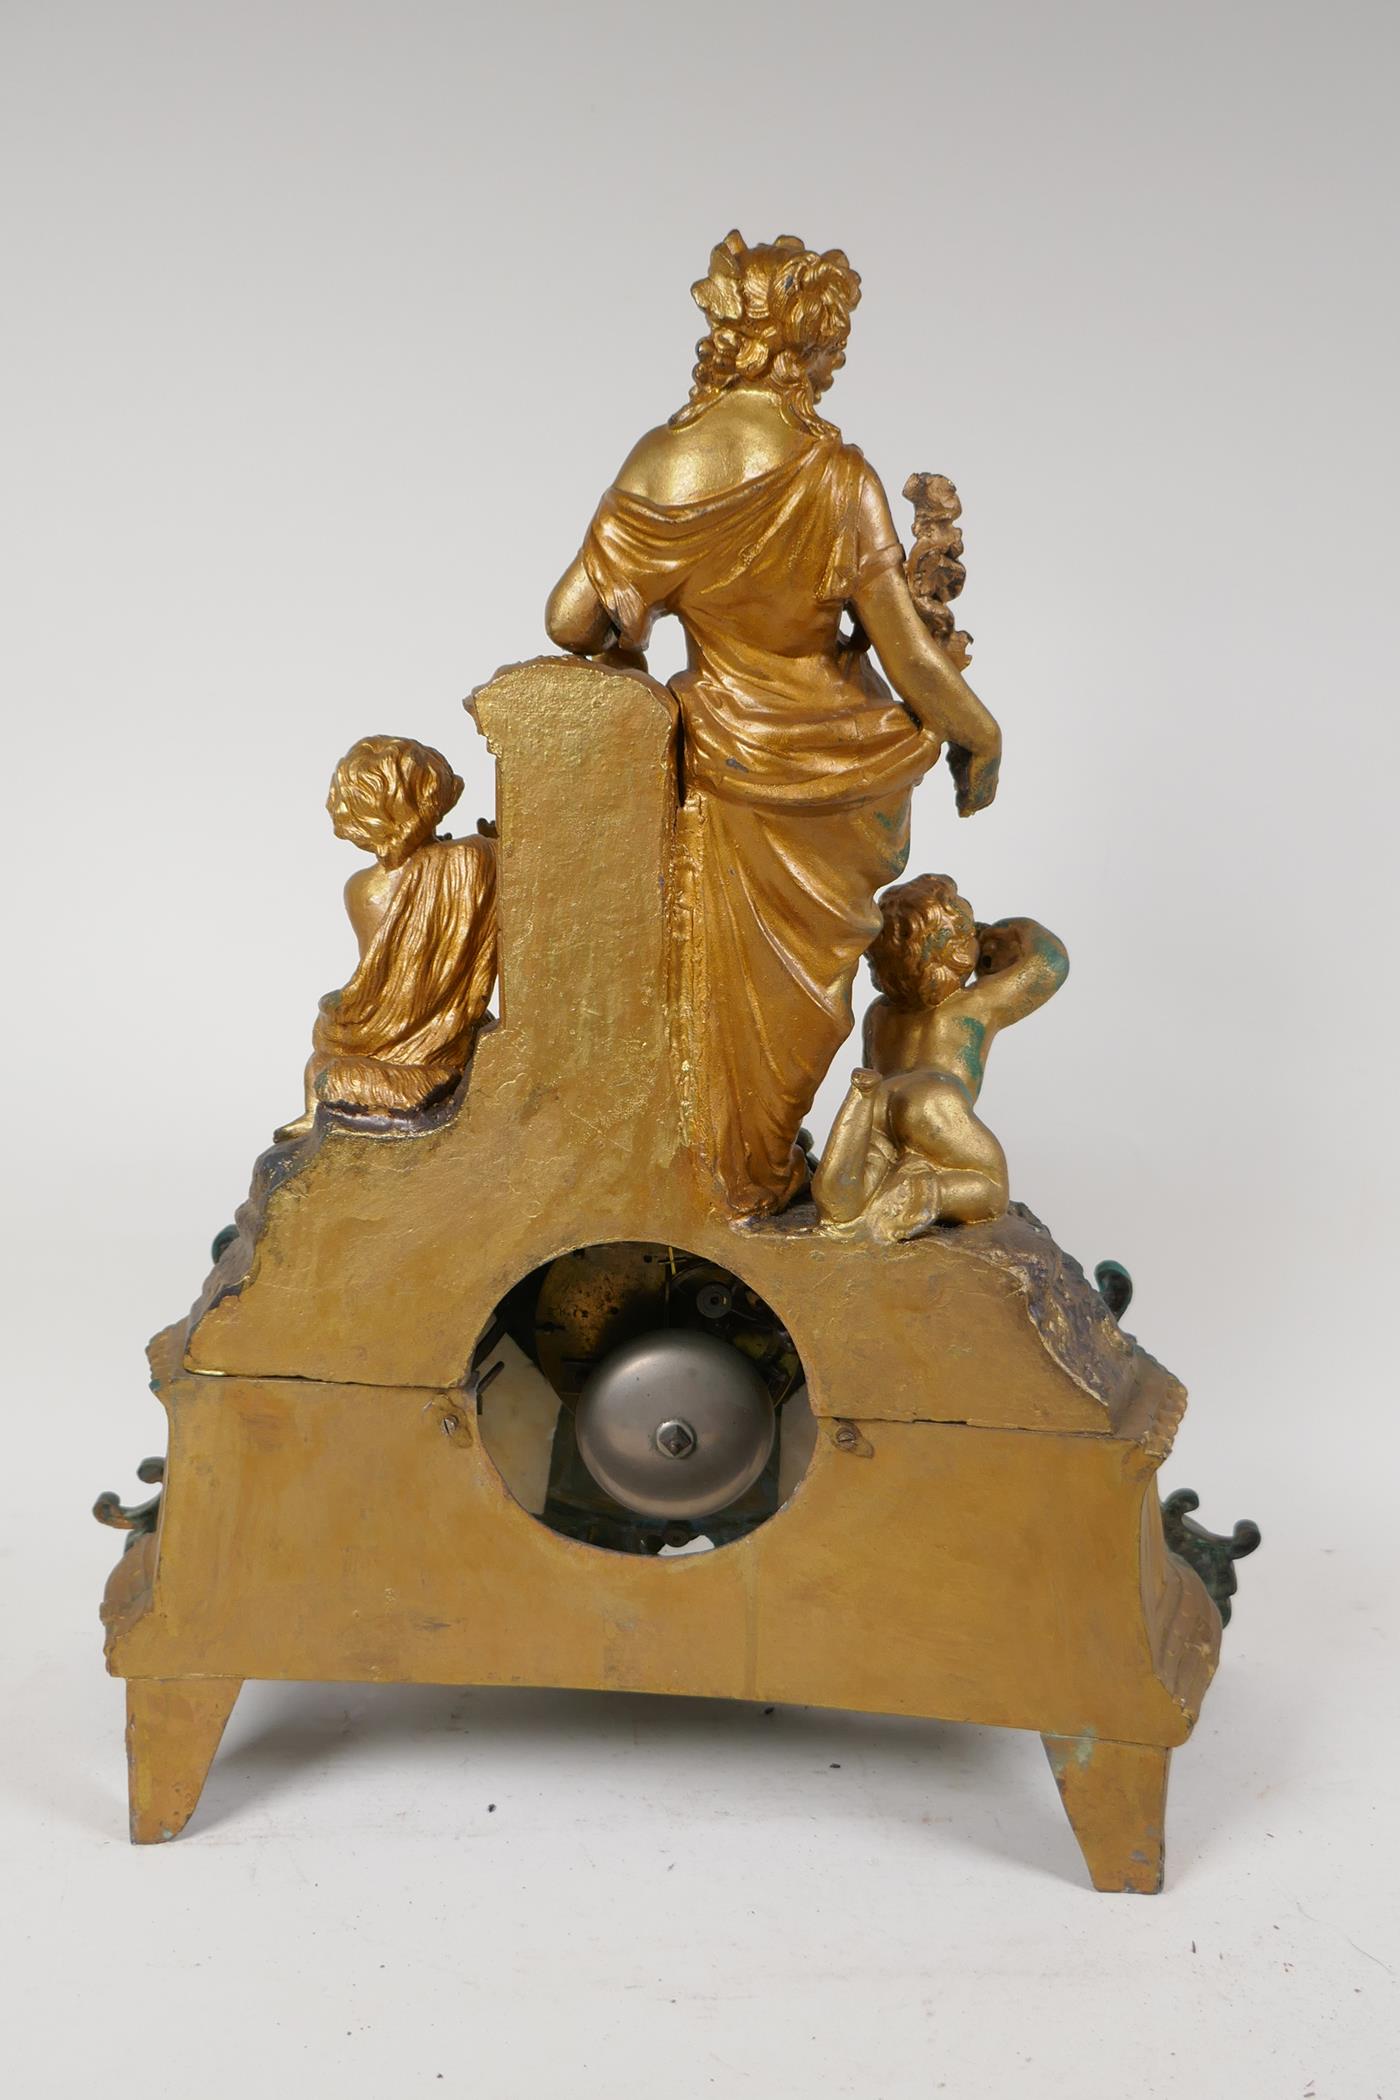 A C19th French spelter mantel clock adorned with Baccanalian figures, with twin train movement - Image 4 of 5